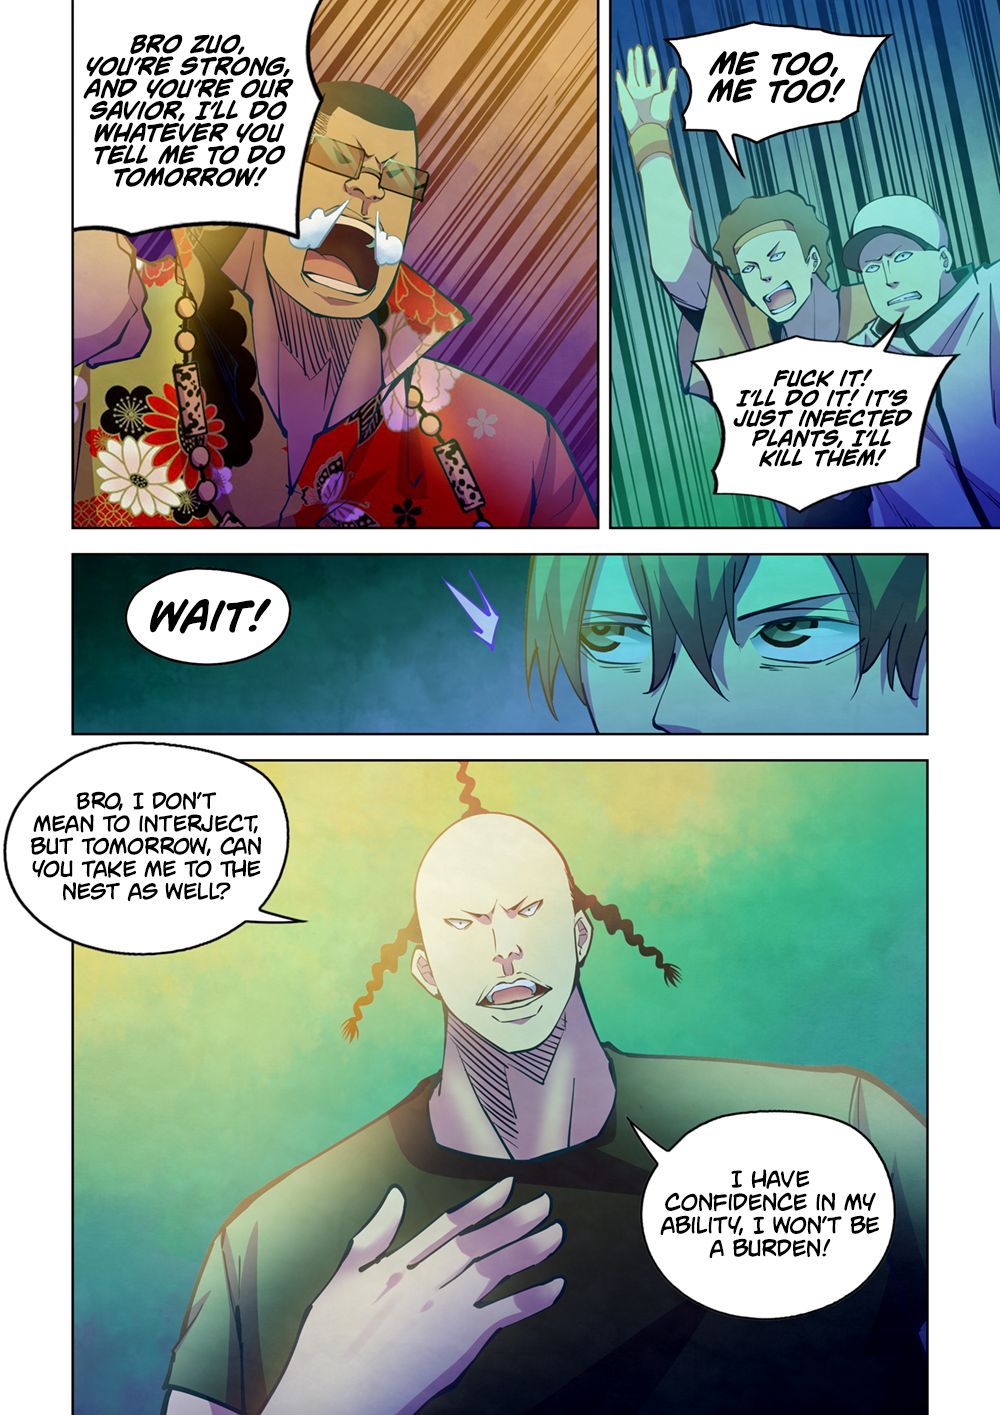 The Last Human Chapter 233 - Page 13